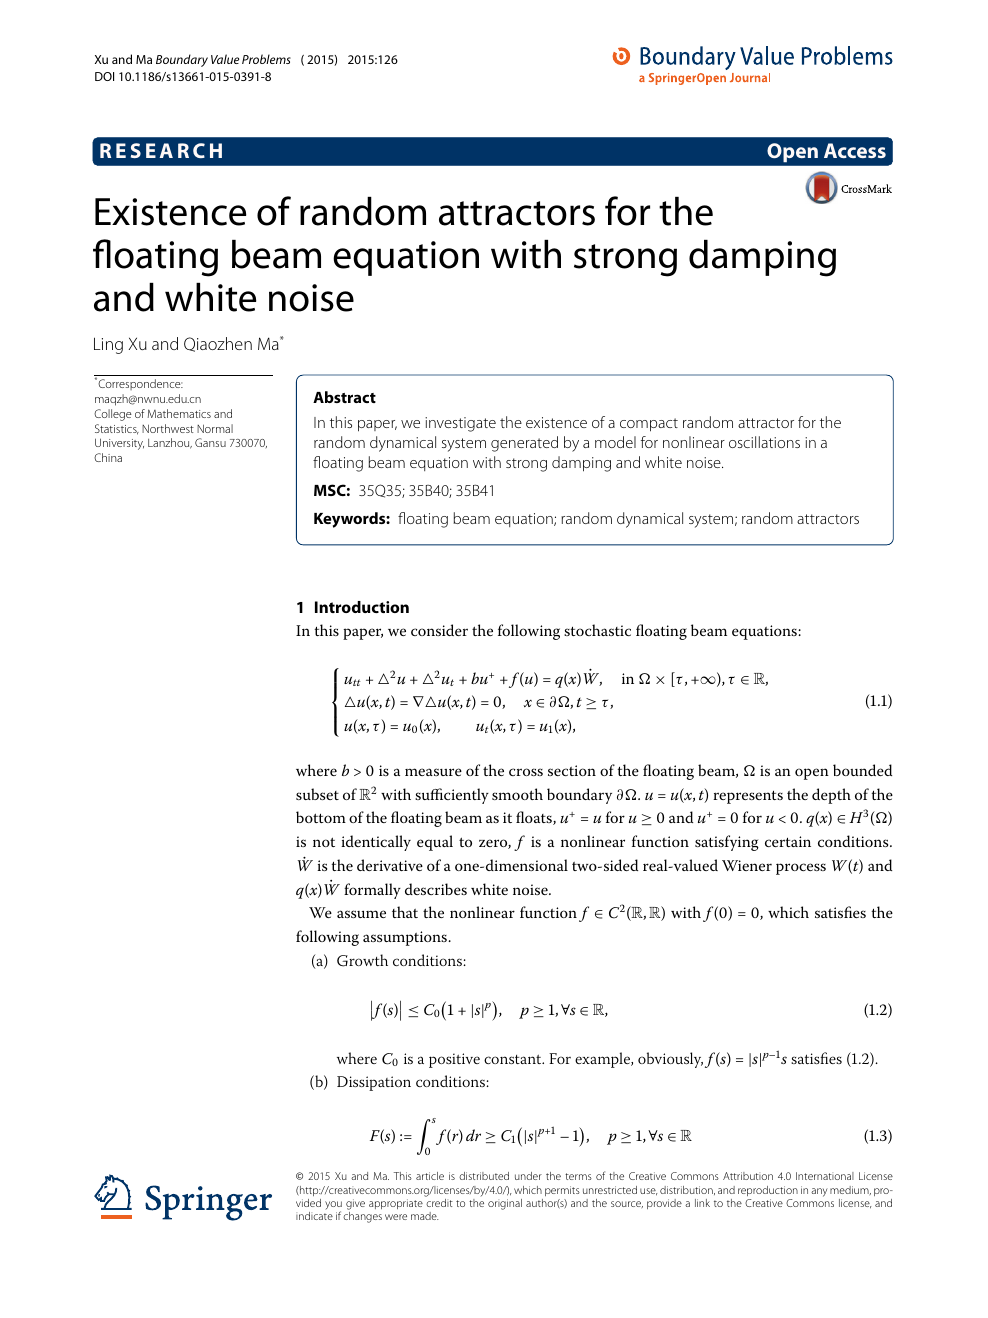 Existence Of Random Attractors For The Floating Beam Equation With Strong Damping And White Noise Topic Of Research Paper In Mathematics Download Scholarly Article Pdf And Read For Free On Cyberleninka